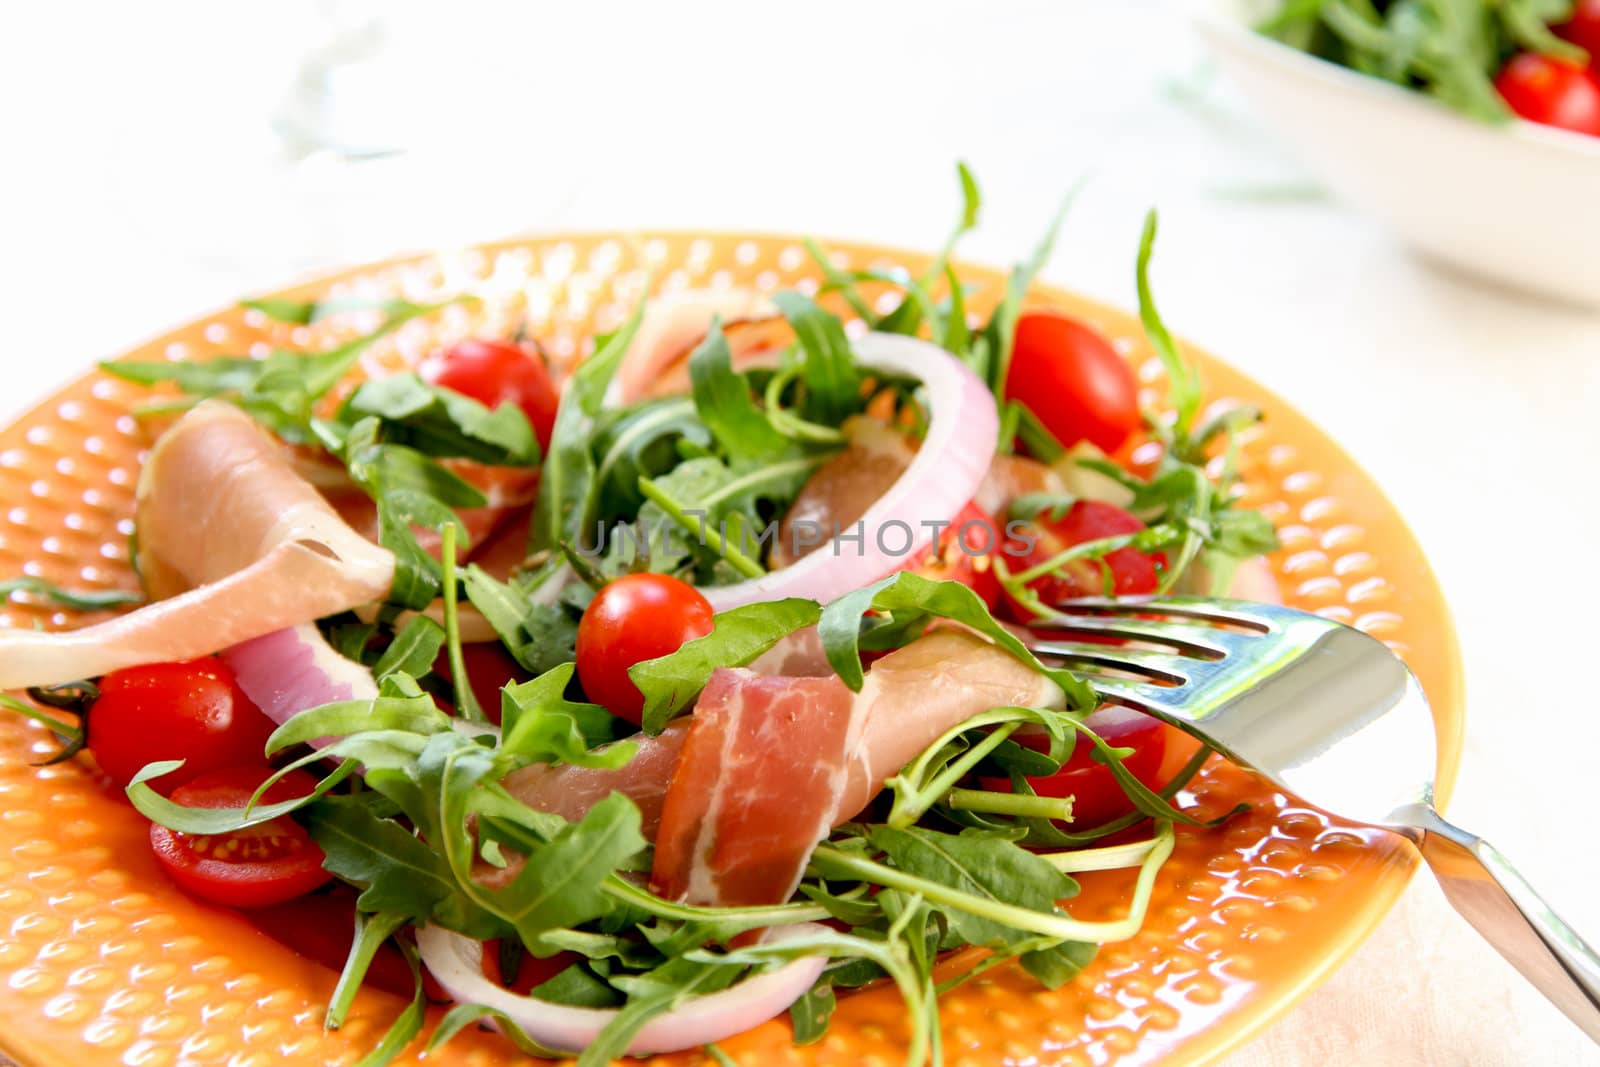 Prosciutto with rocket salad by vanillaechoes